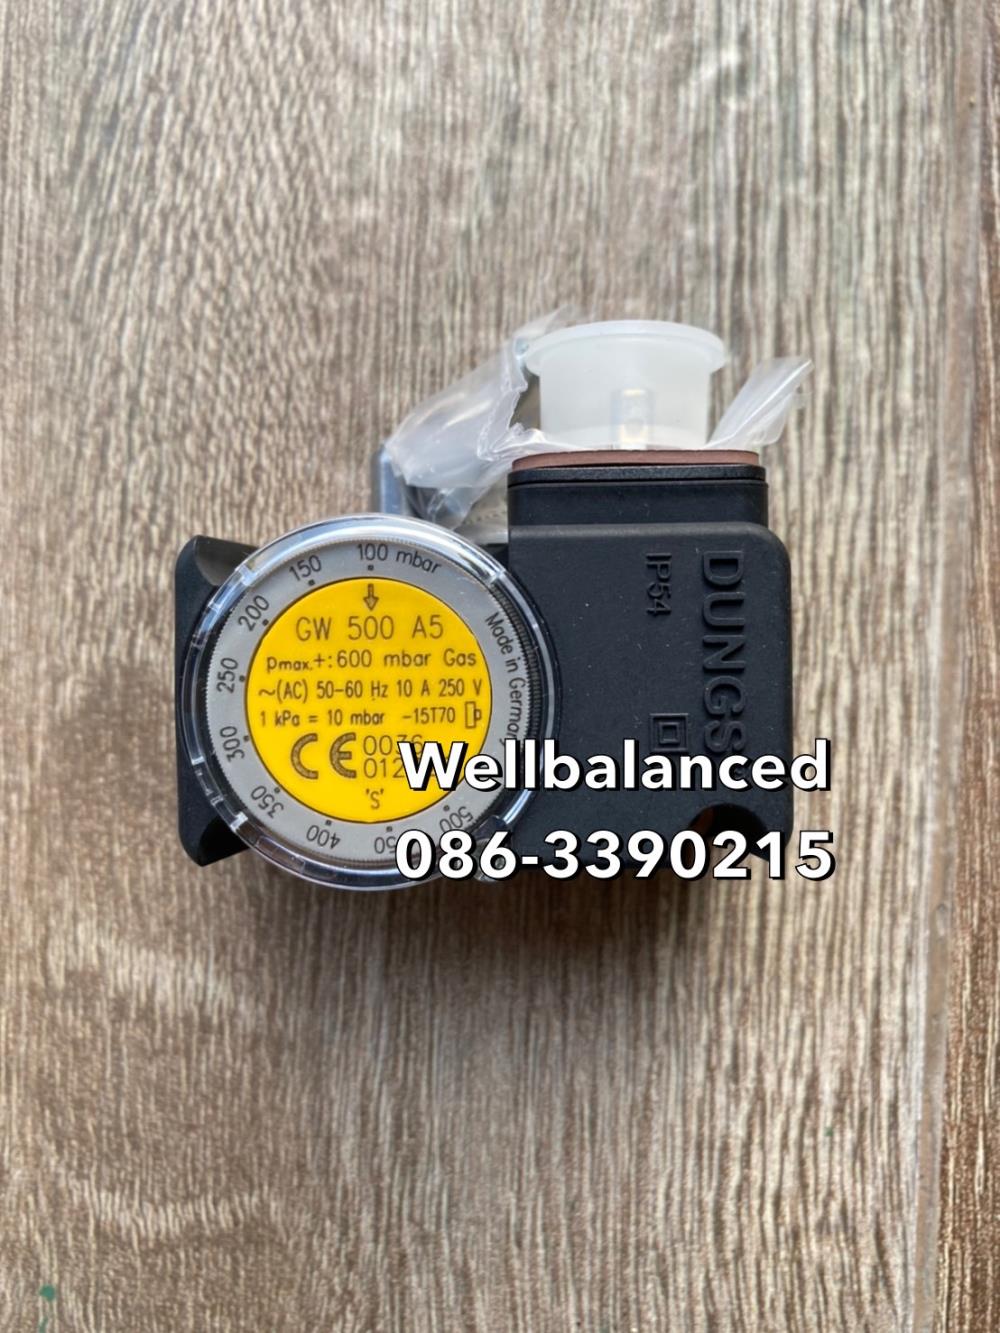 " DUNGS " Pressure Switch Model : GW 500 A5," DUNGS " Pressure Switch Model : GW 500 A5," DUNGS " Pressure Switch Model : GW 500 A5,Instruments and Controls/Switches